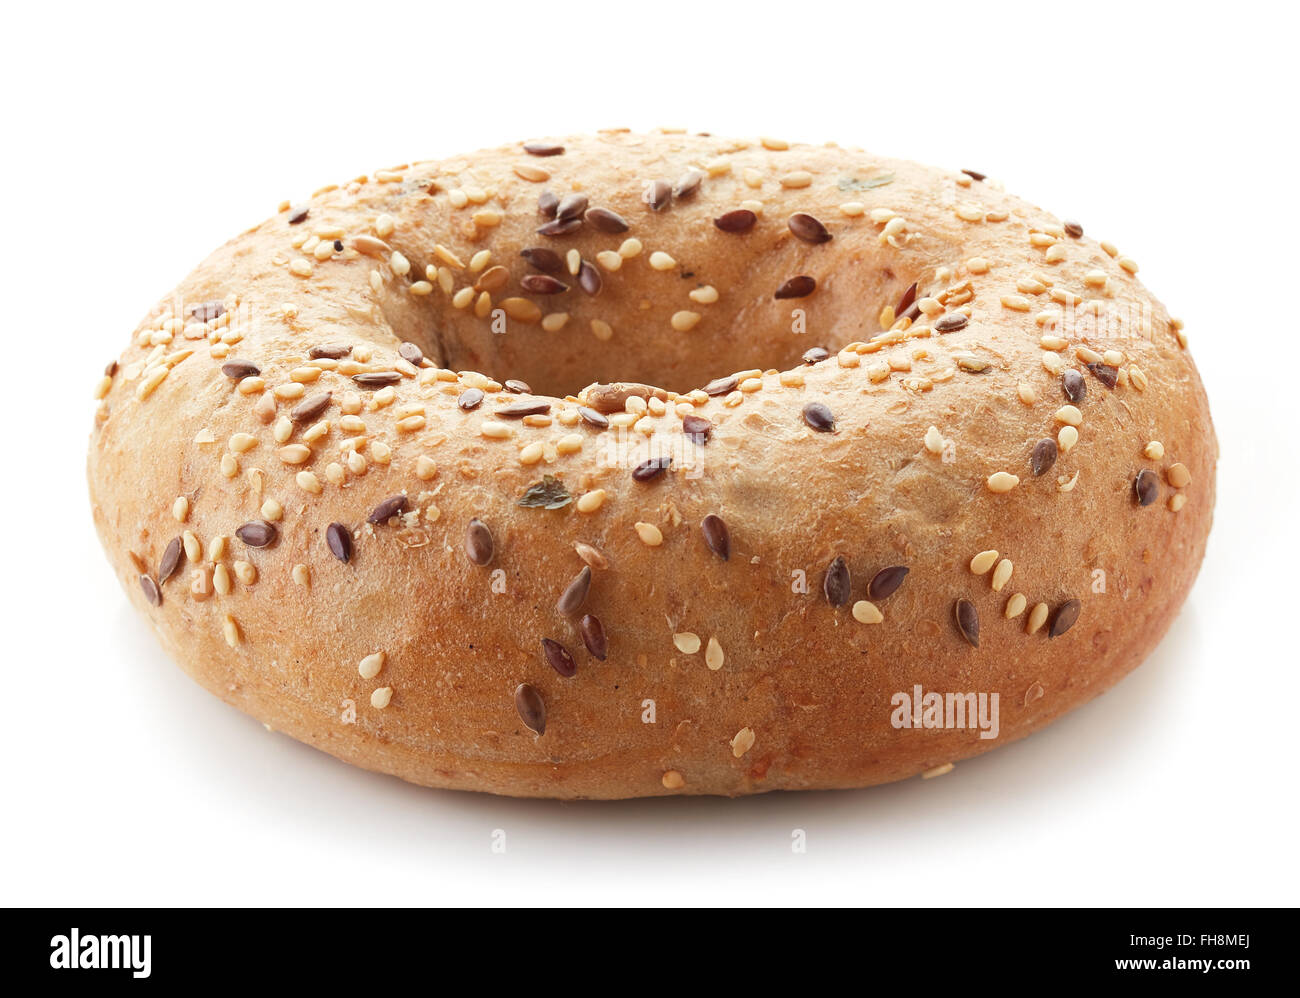 Fullgrain bagel with seeds isolated on white background Stock Photo